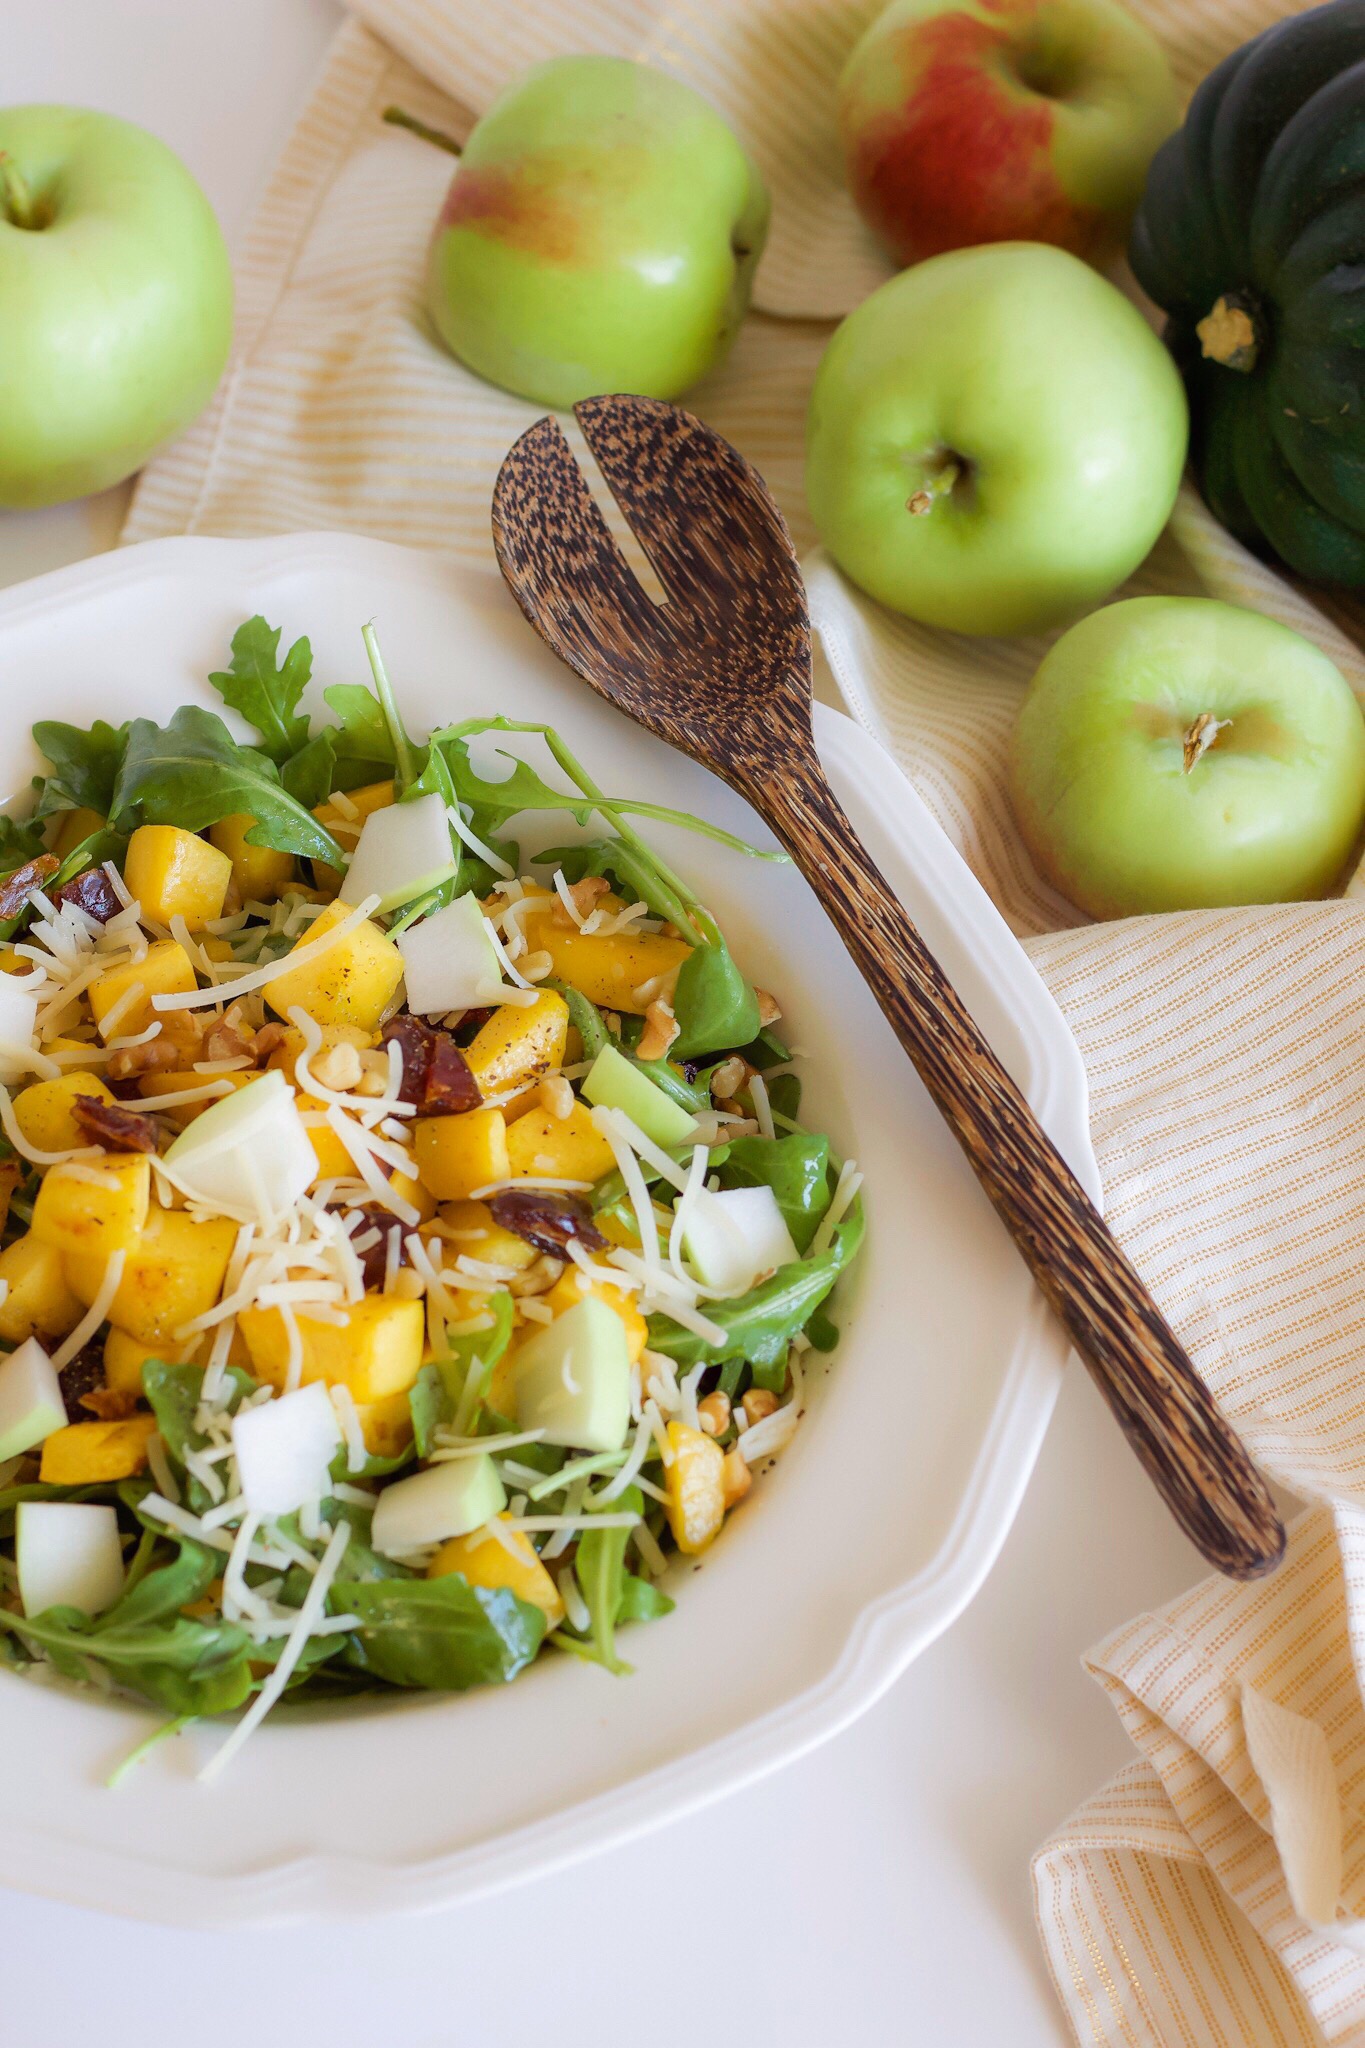 A Fall Salad with Roasted Butternut Squash and Apples